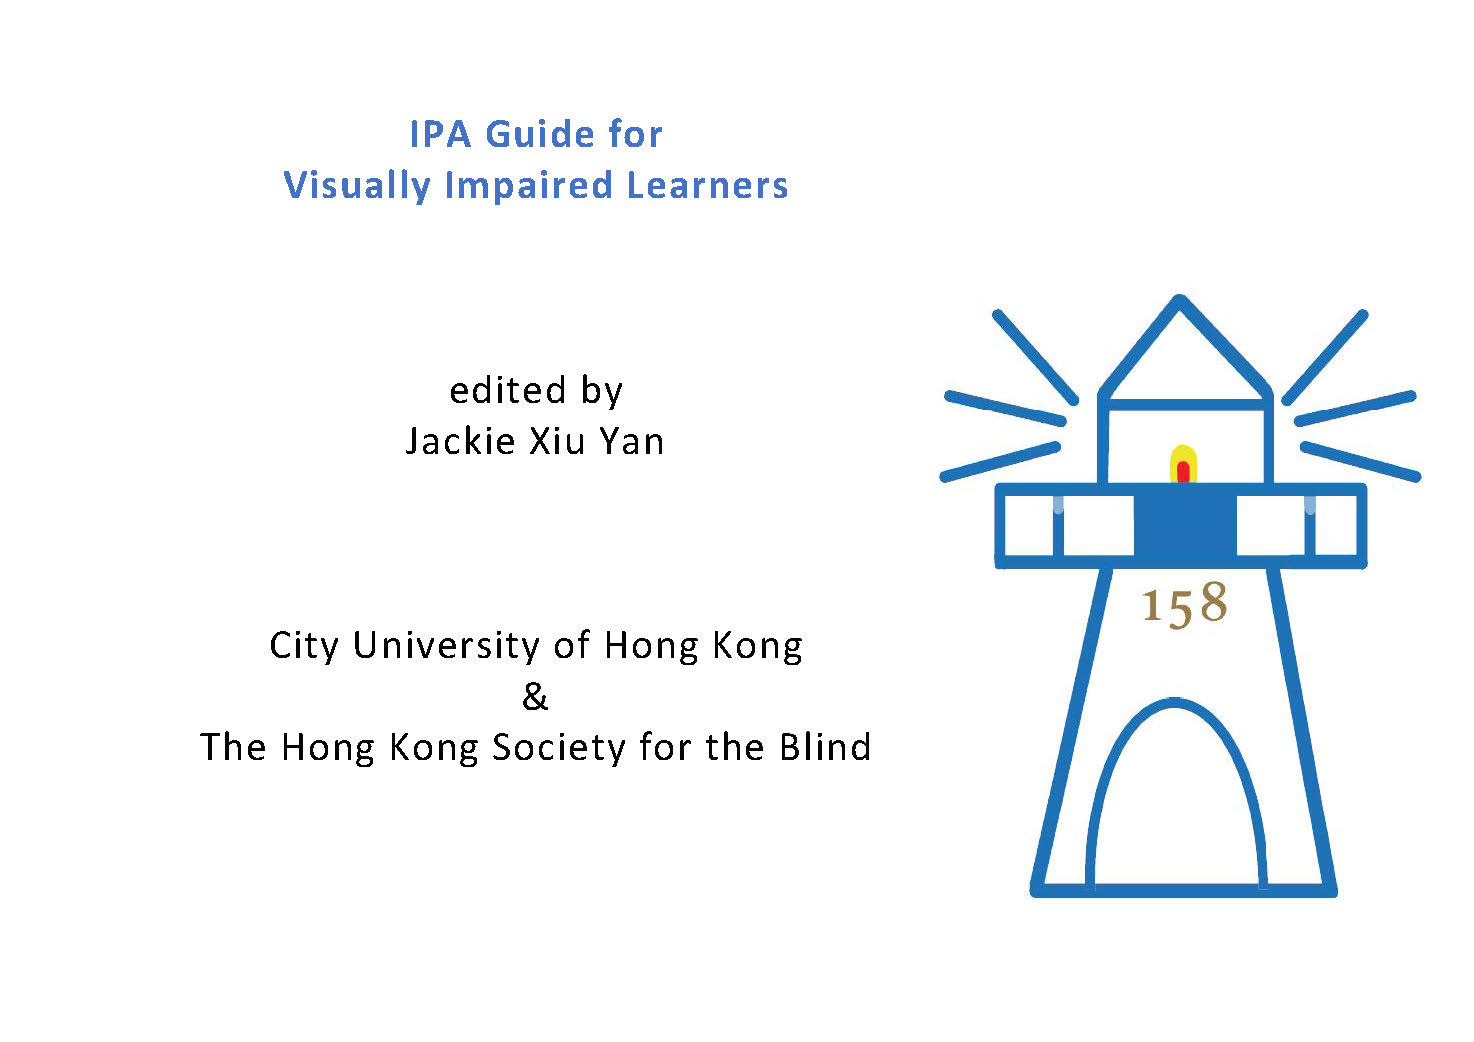 CLASS-IPA Guide for Visually Impaired Learners (FINAL20200722)_new v2 - Dr Jackie Xiu Yan_Page_01.jpg